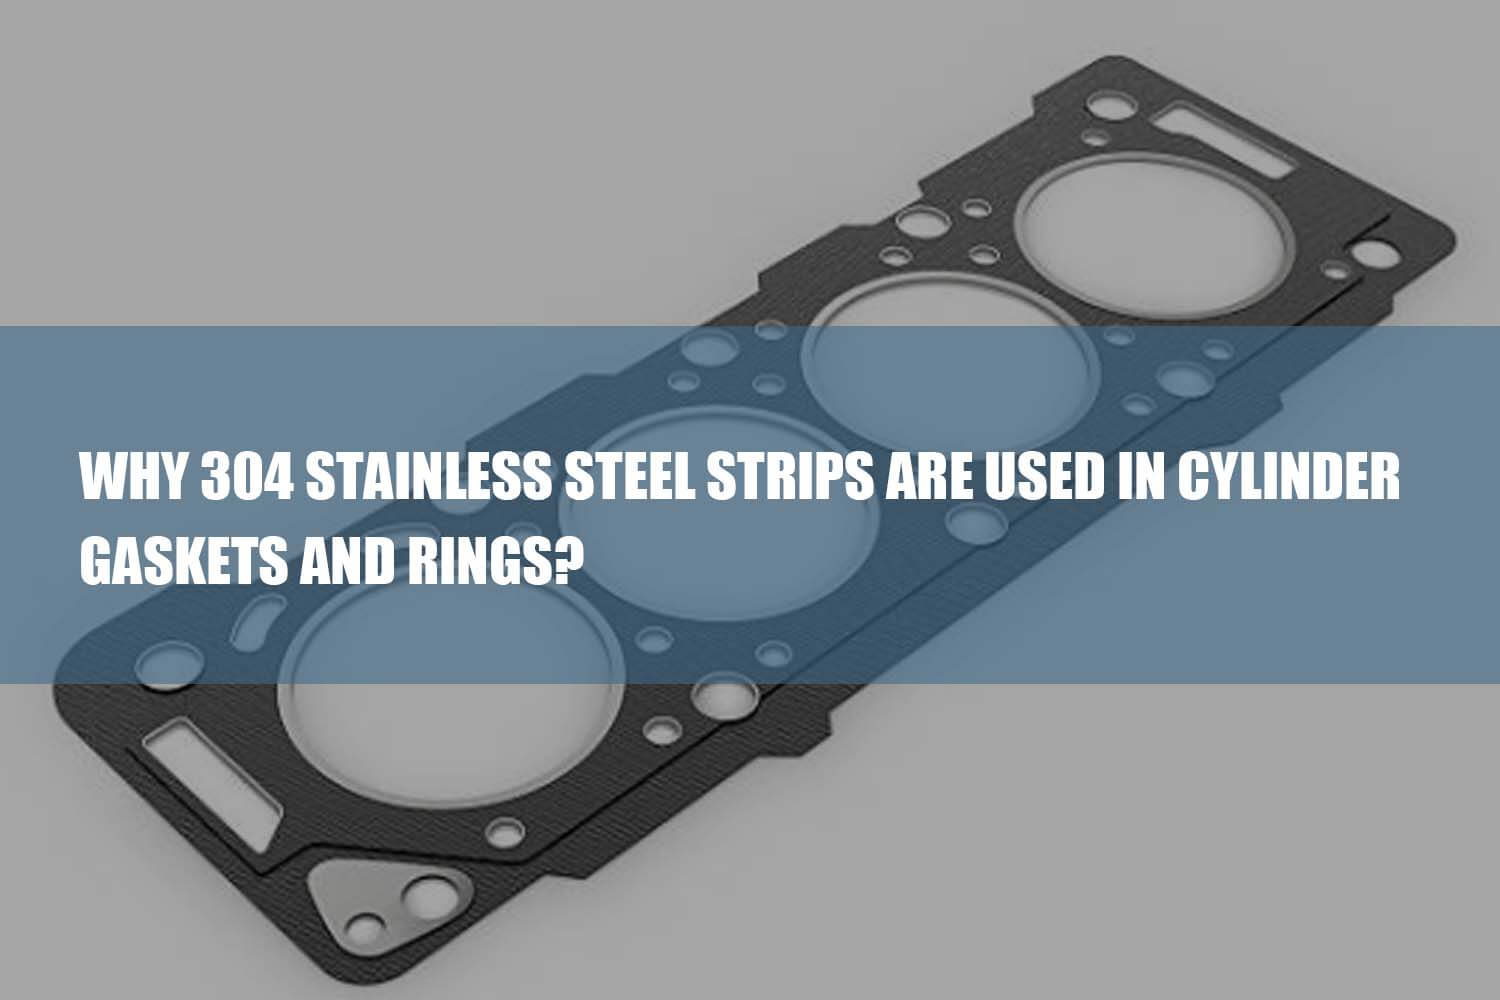 304 stainless steel strips are used in cylinder gaskets and rings